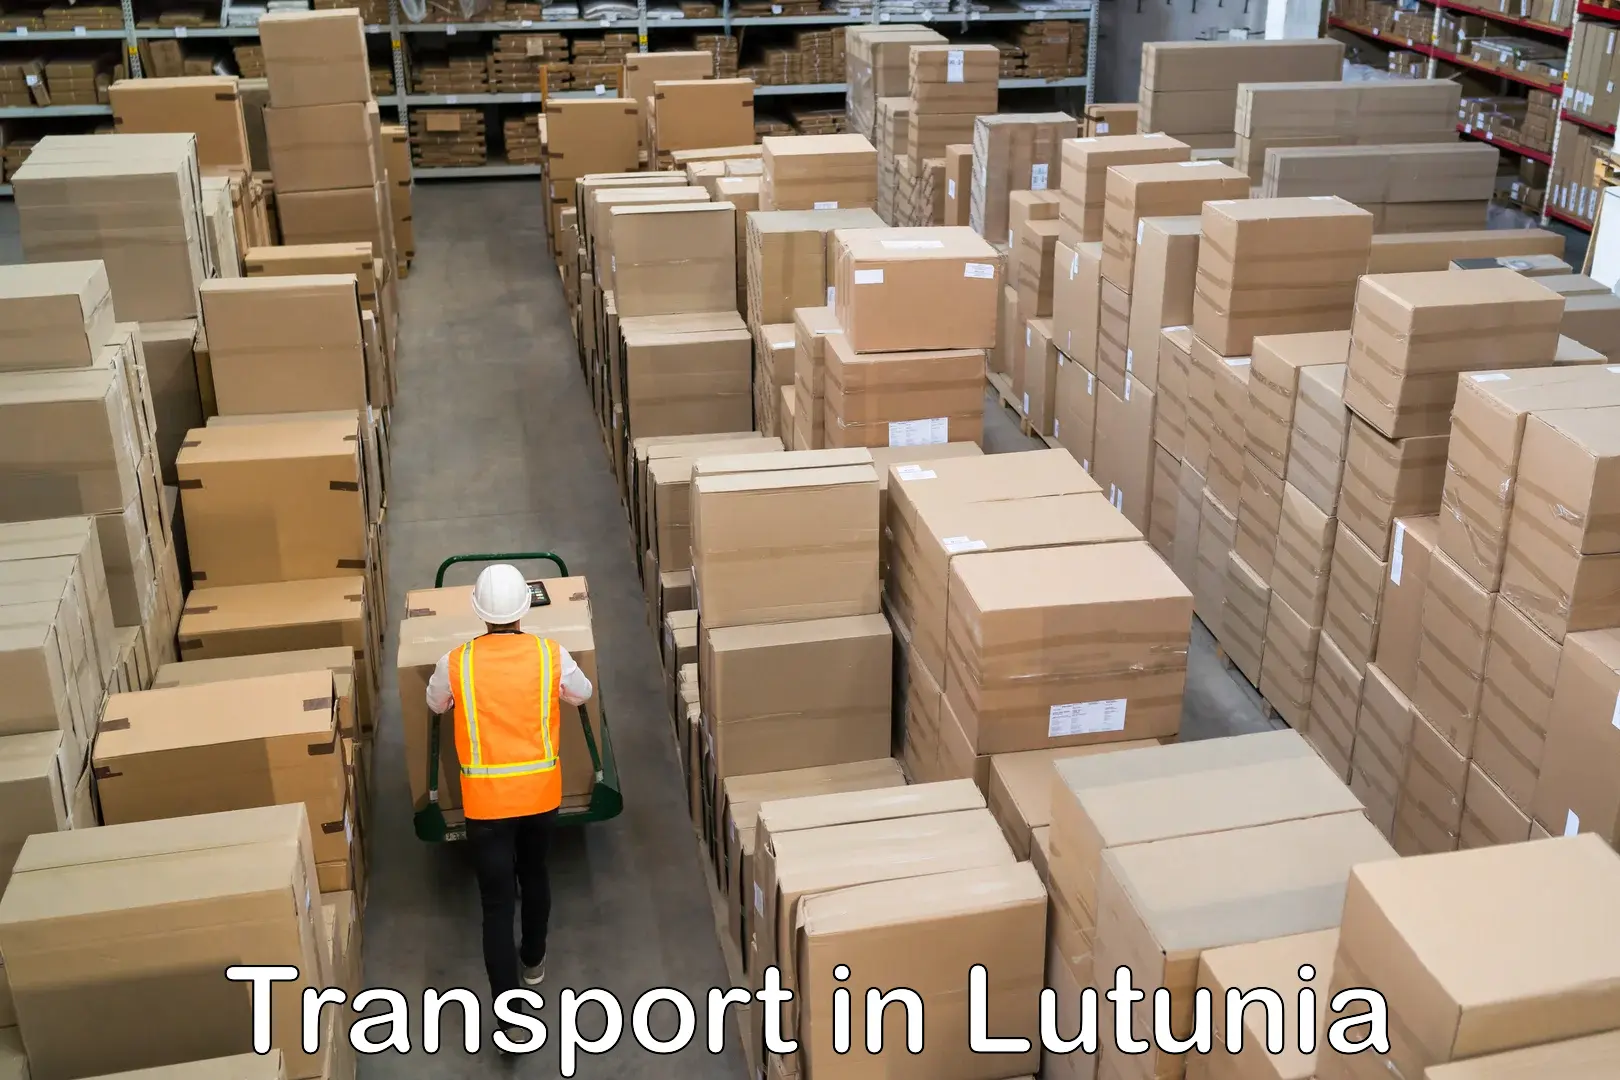 Daily parcel service transport in Lutunia